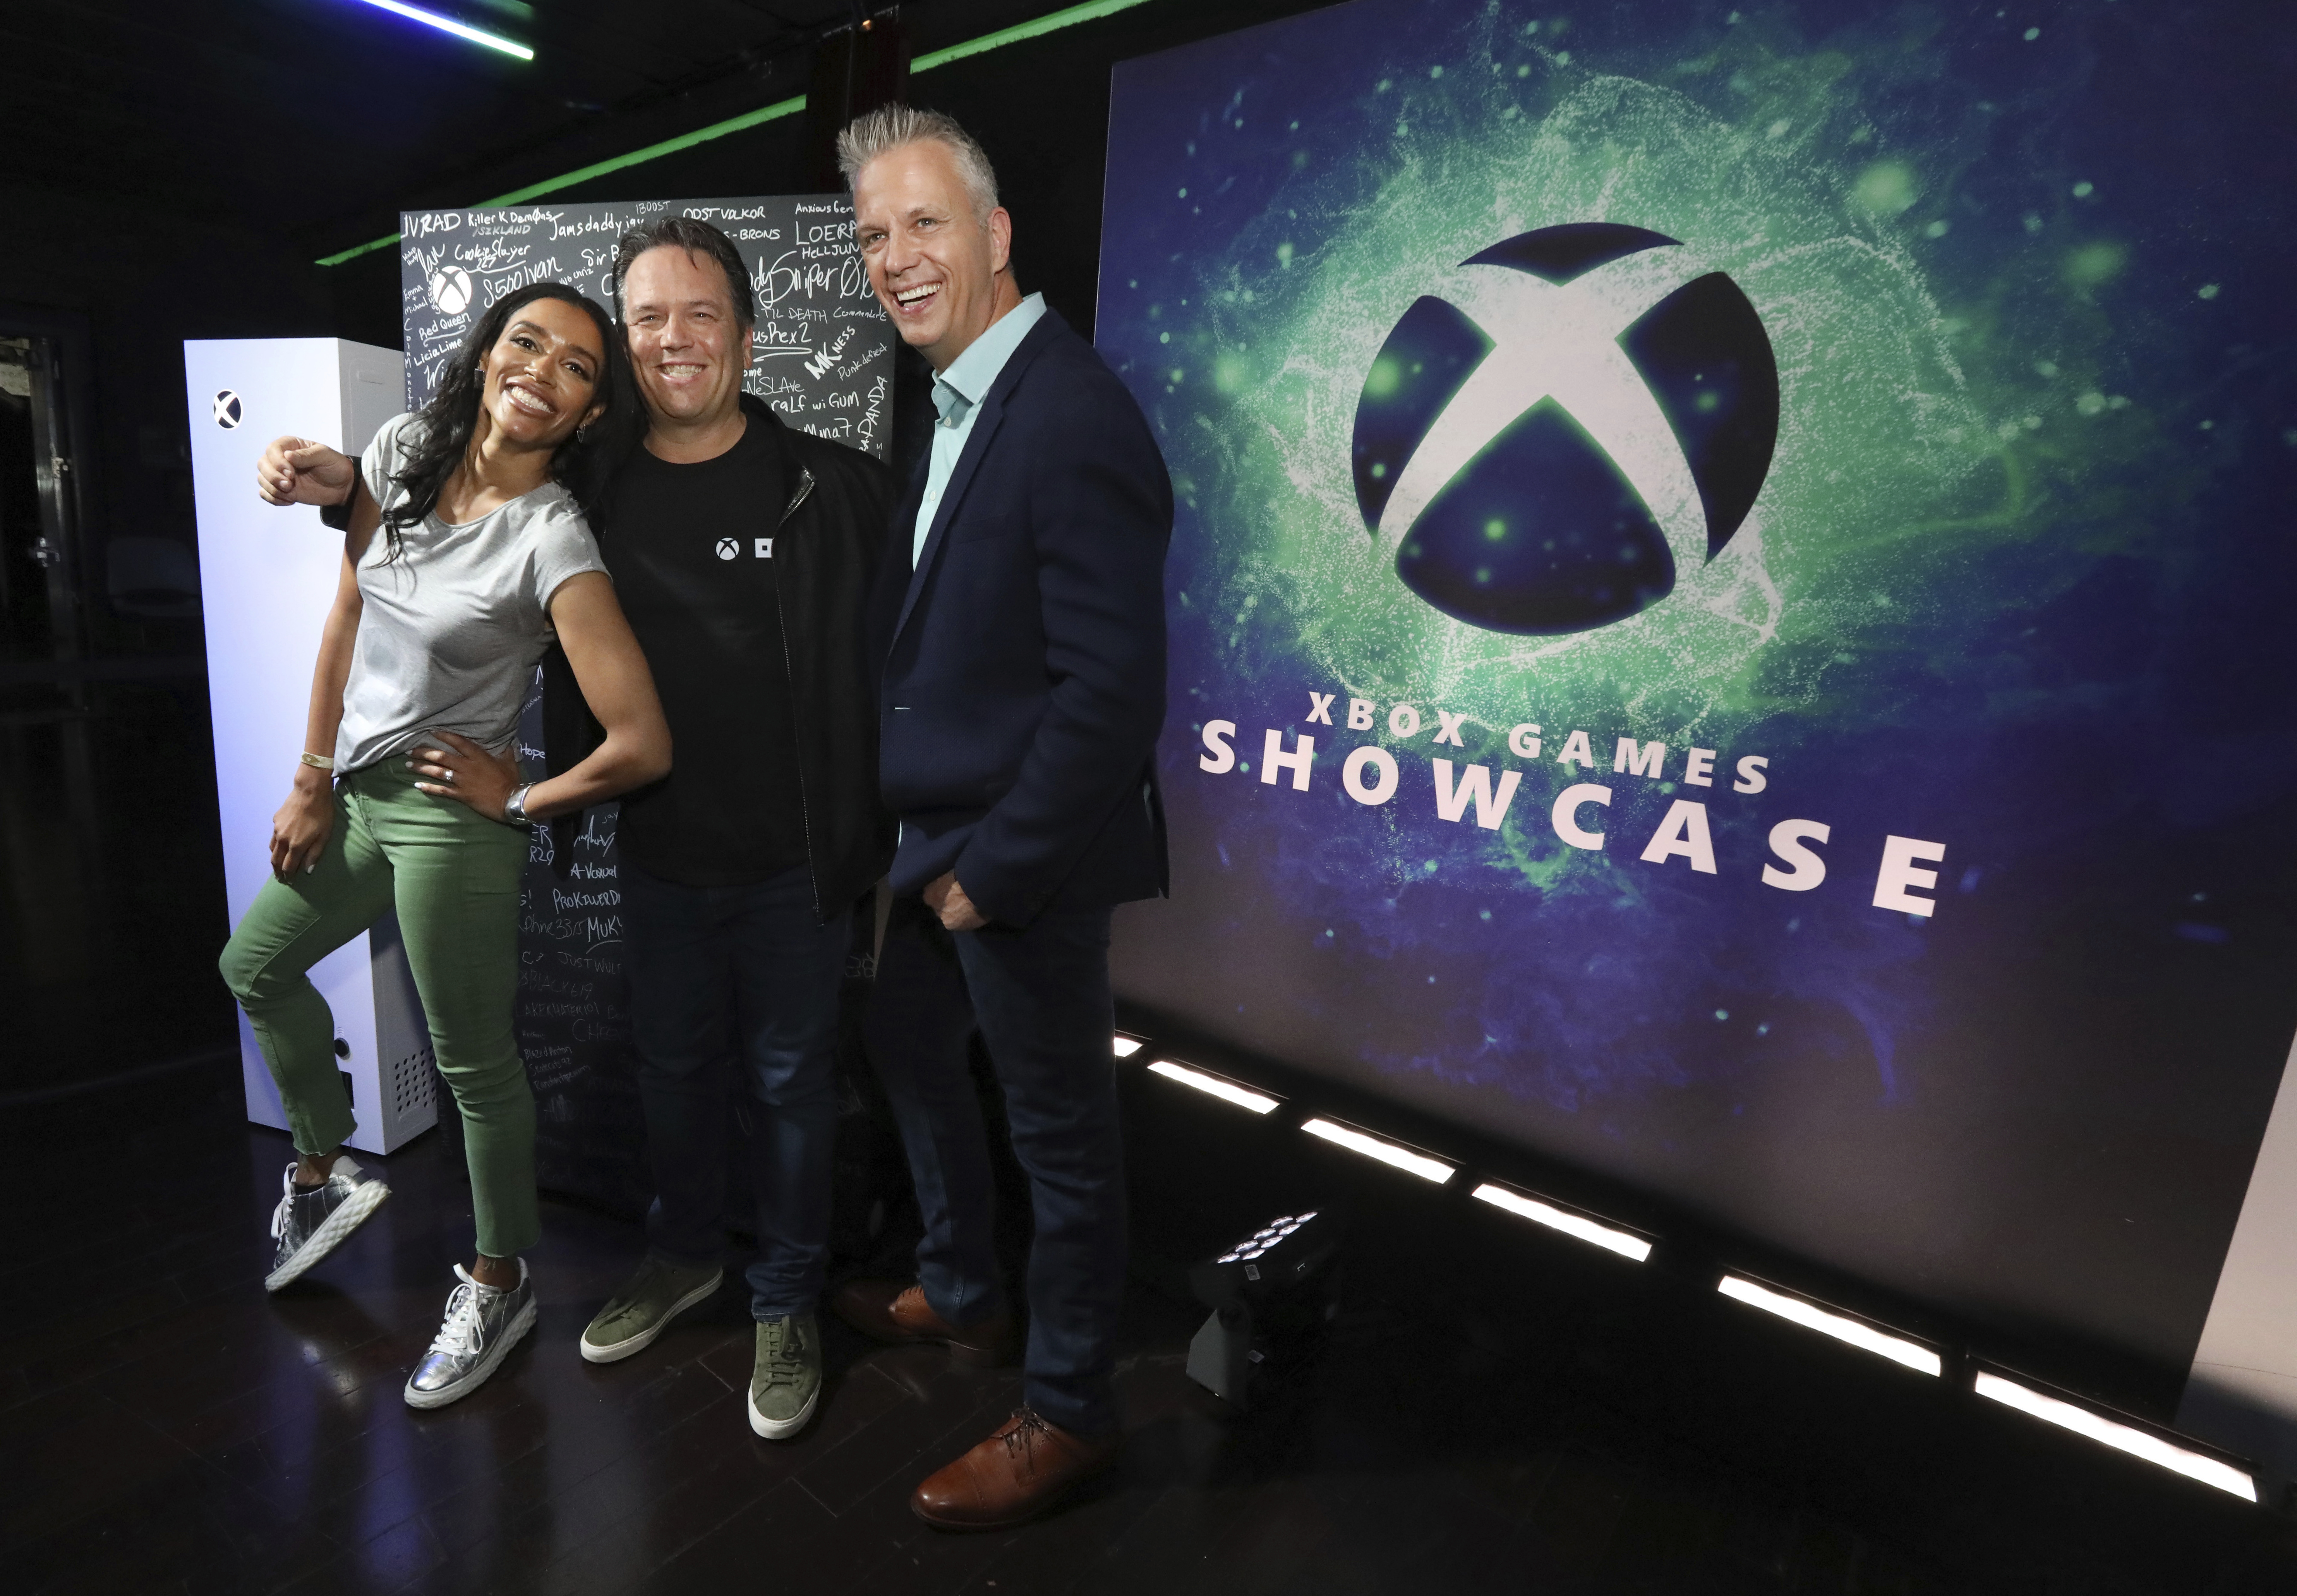 Xbox's Phil Spencer Issues Statement In Response To Starfield And